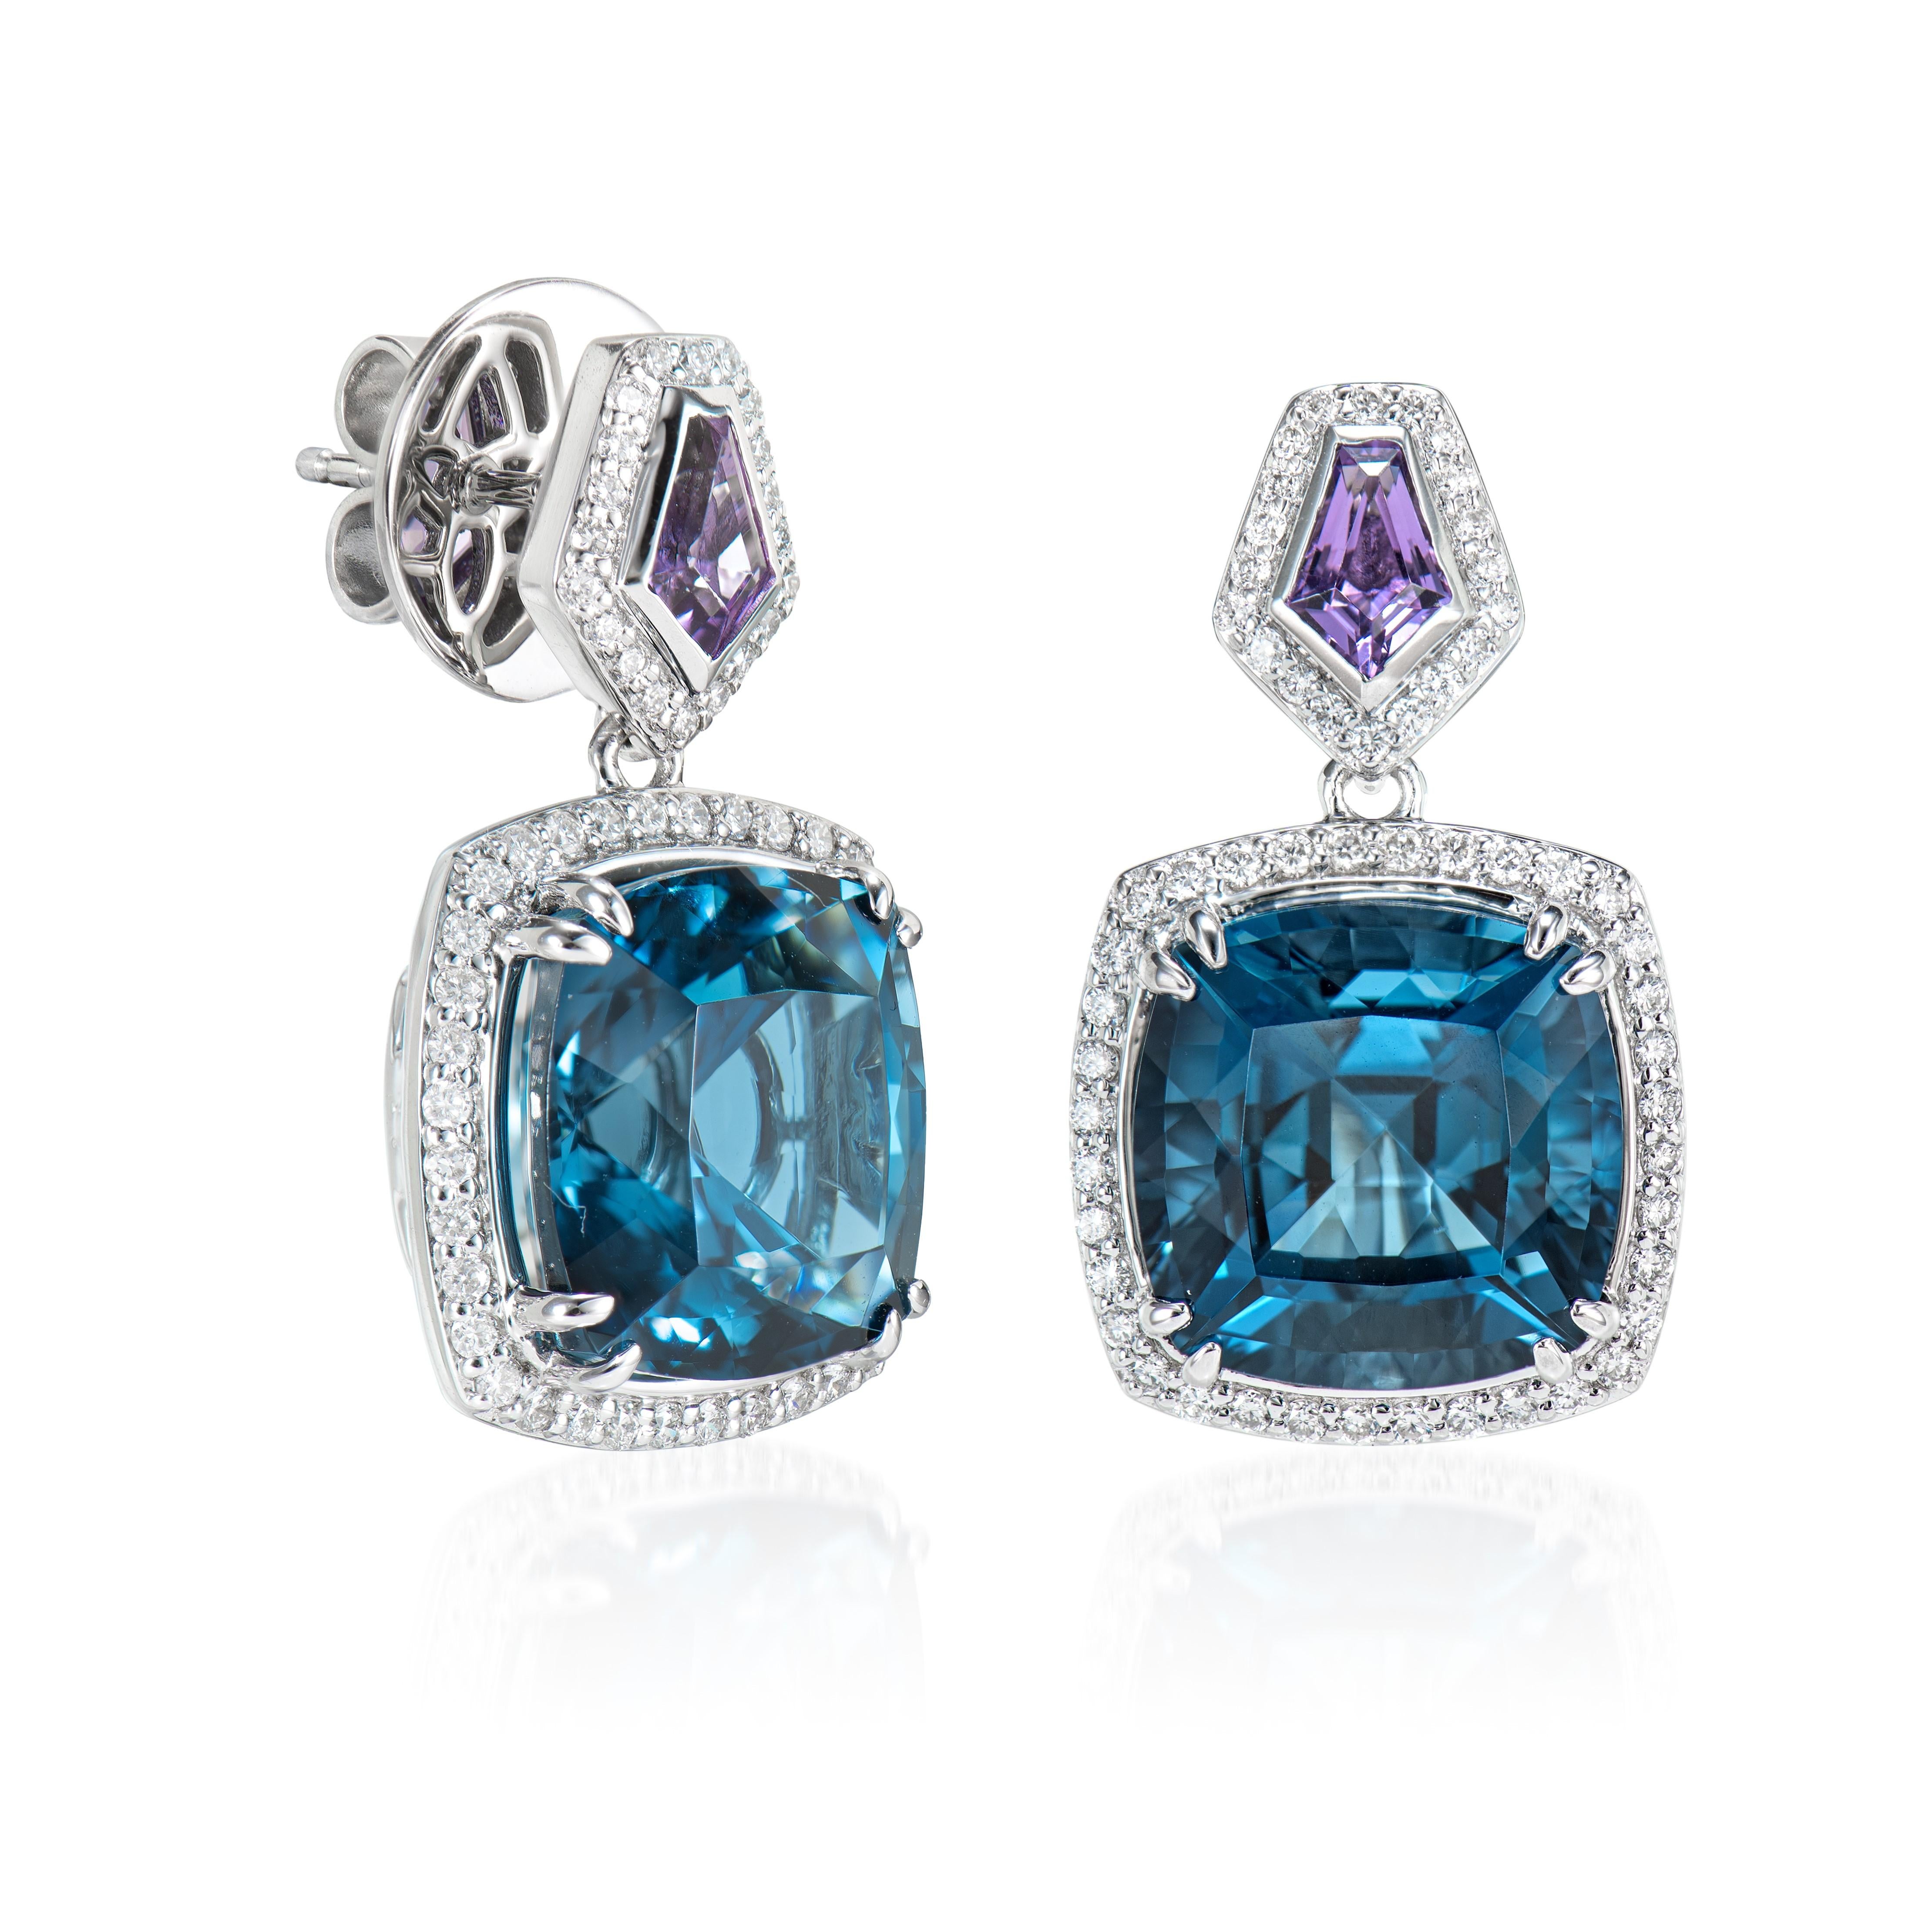 Bold Blue Topaz! Light and easy to wear these earrings showcase deep blue topaz accented with a multi color gemstone and diamond frame. These earrings are dainty yet have a great pop of color from the vibrant gems.

London Blue Topaz Drop Earrings